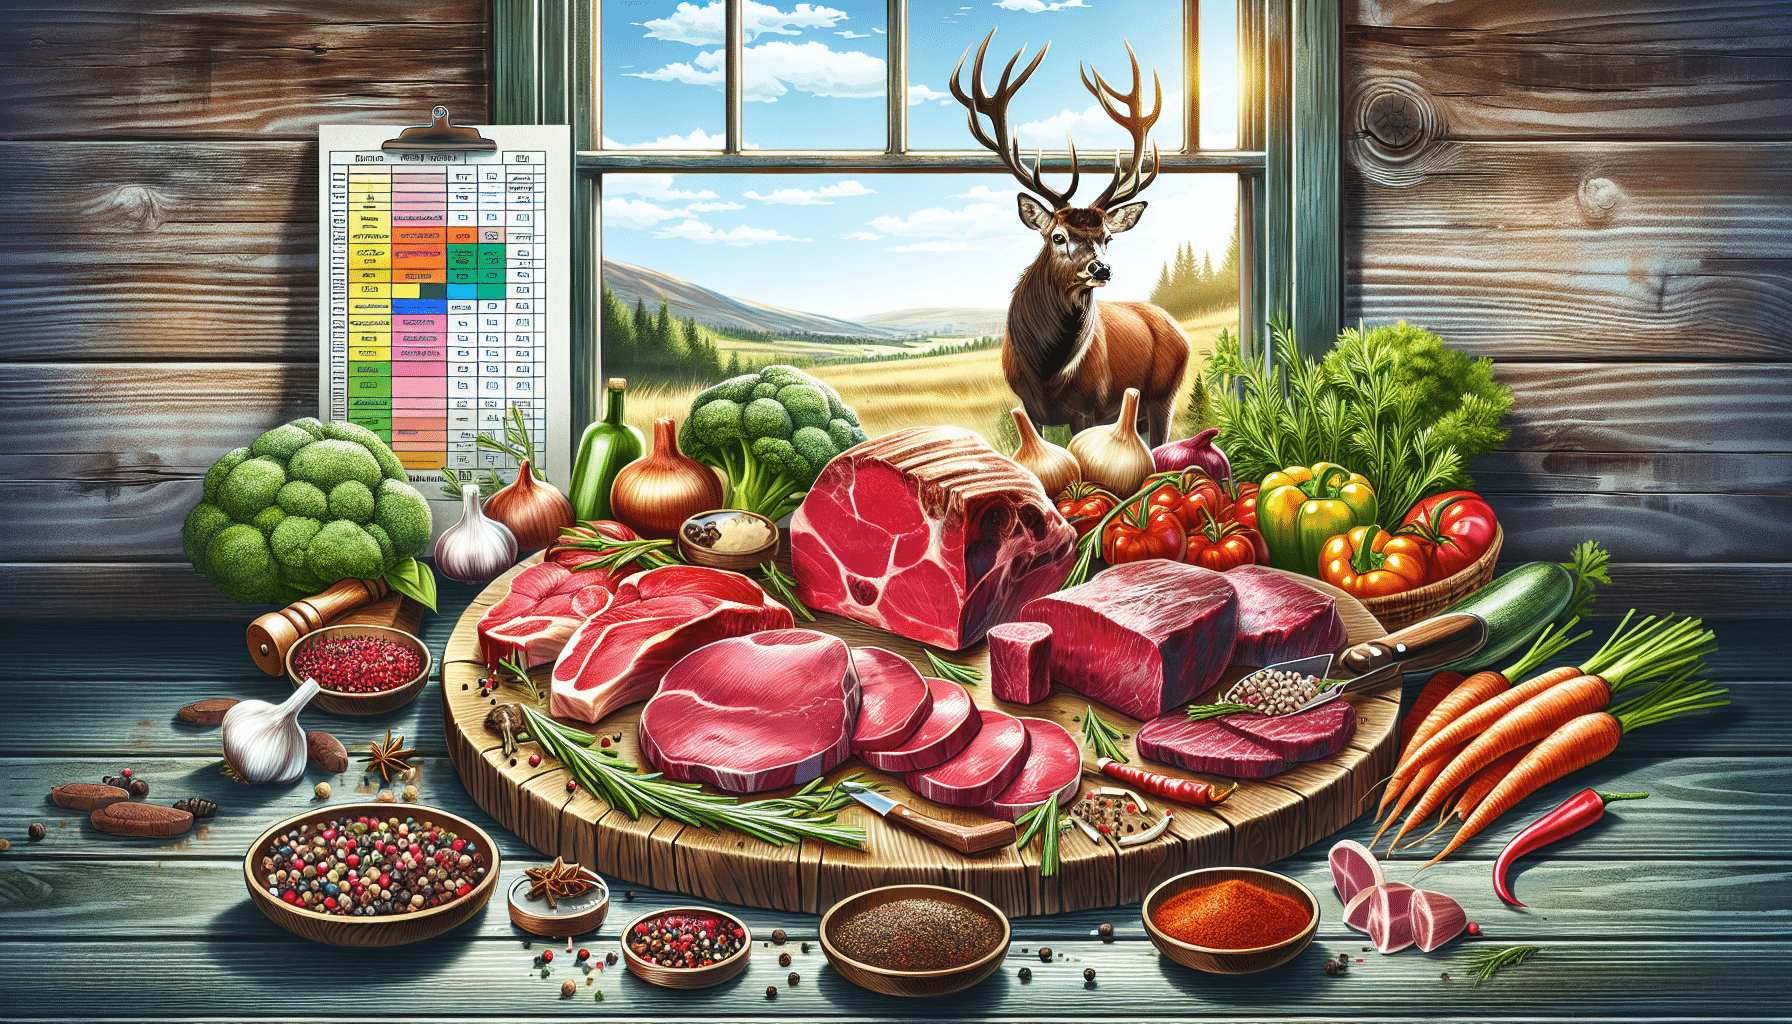 A rustic wooden table set with a variety of raw venison cuts such as steaks, roasts, and ground meat. Surrounding the deer meat are different ingredients like fresh herbs, spices, and vegetables indicating a healthy meal preparation. A dietary chart is present in the background contributing to the health aspects of the meal. Nature is visible through a window, suggesting the link between the wild deer and the meal. No people, brands, or text are present in this illustration.